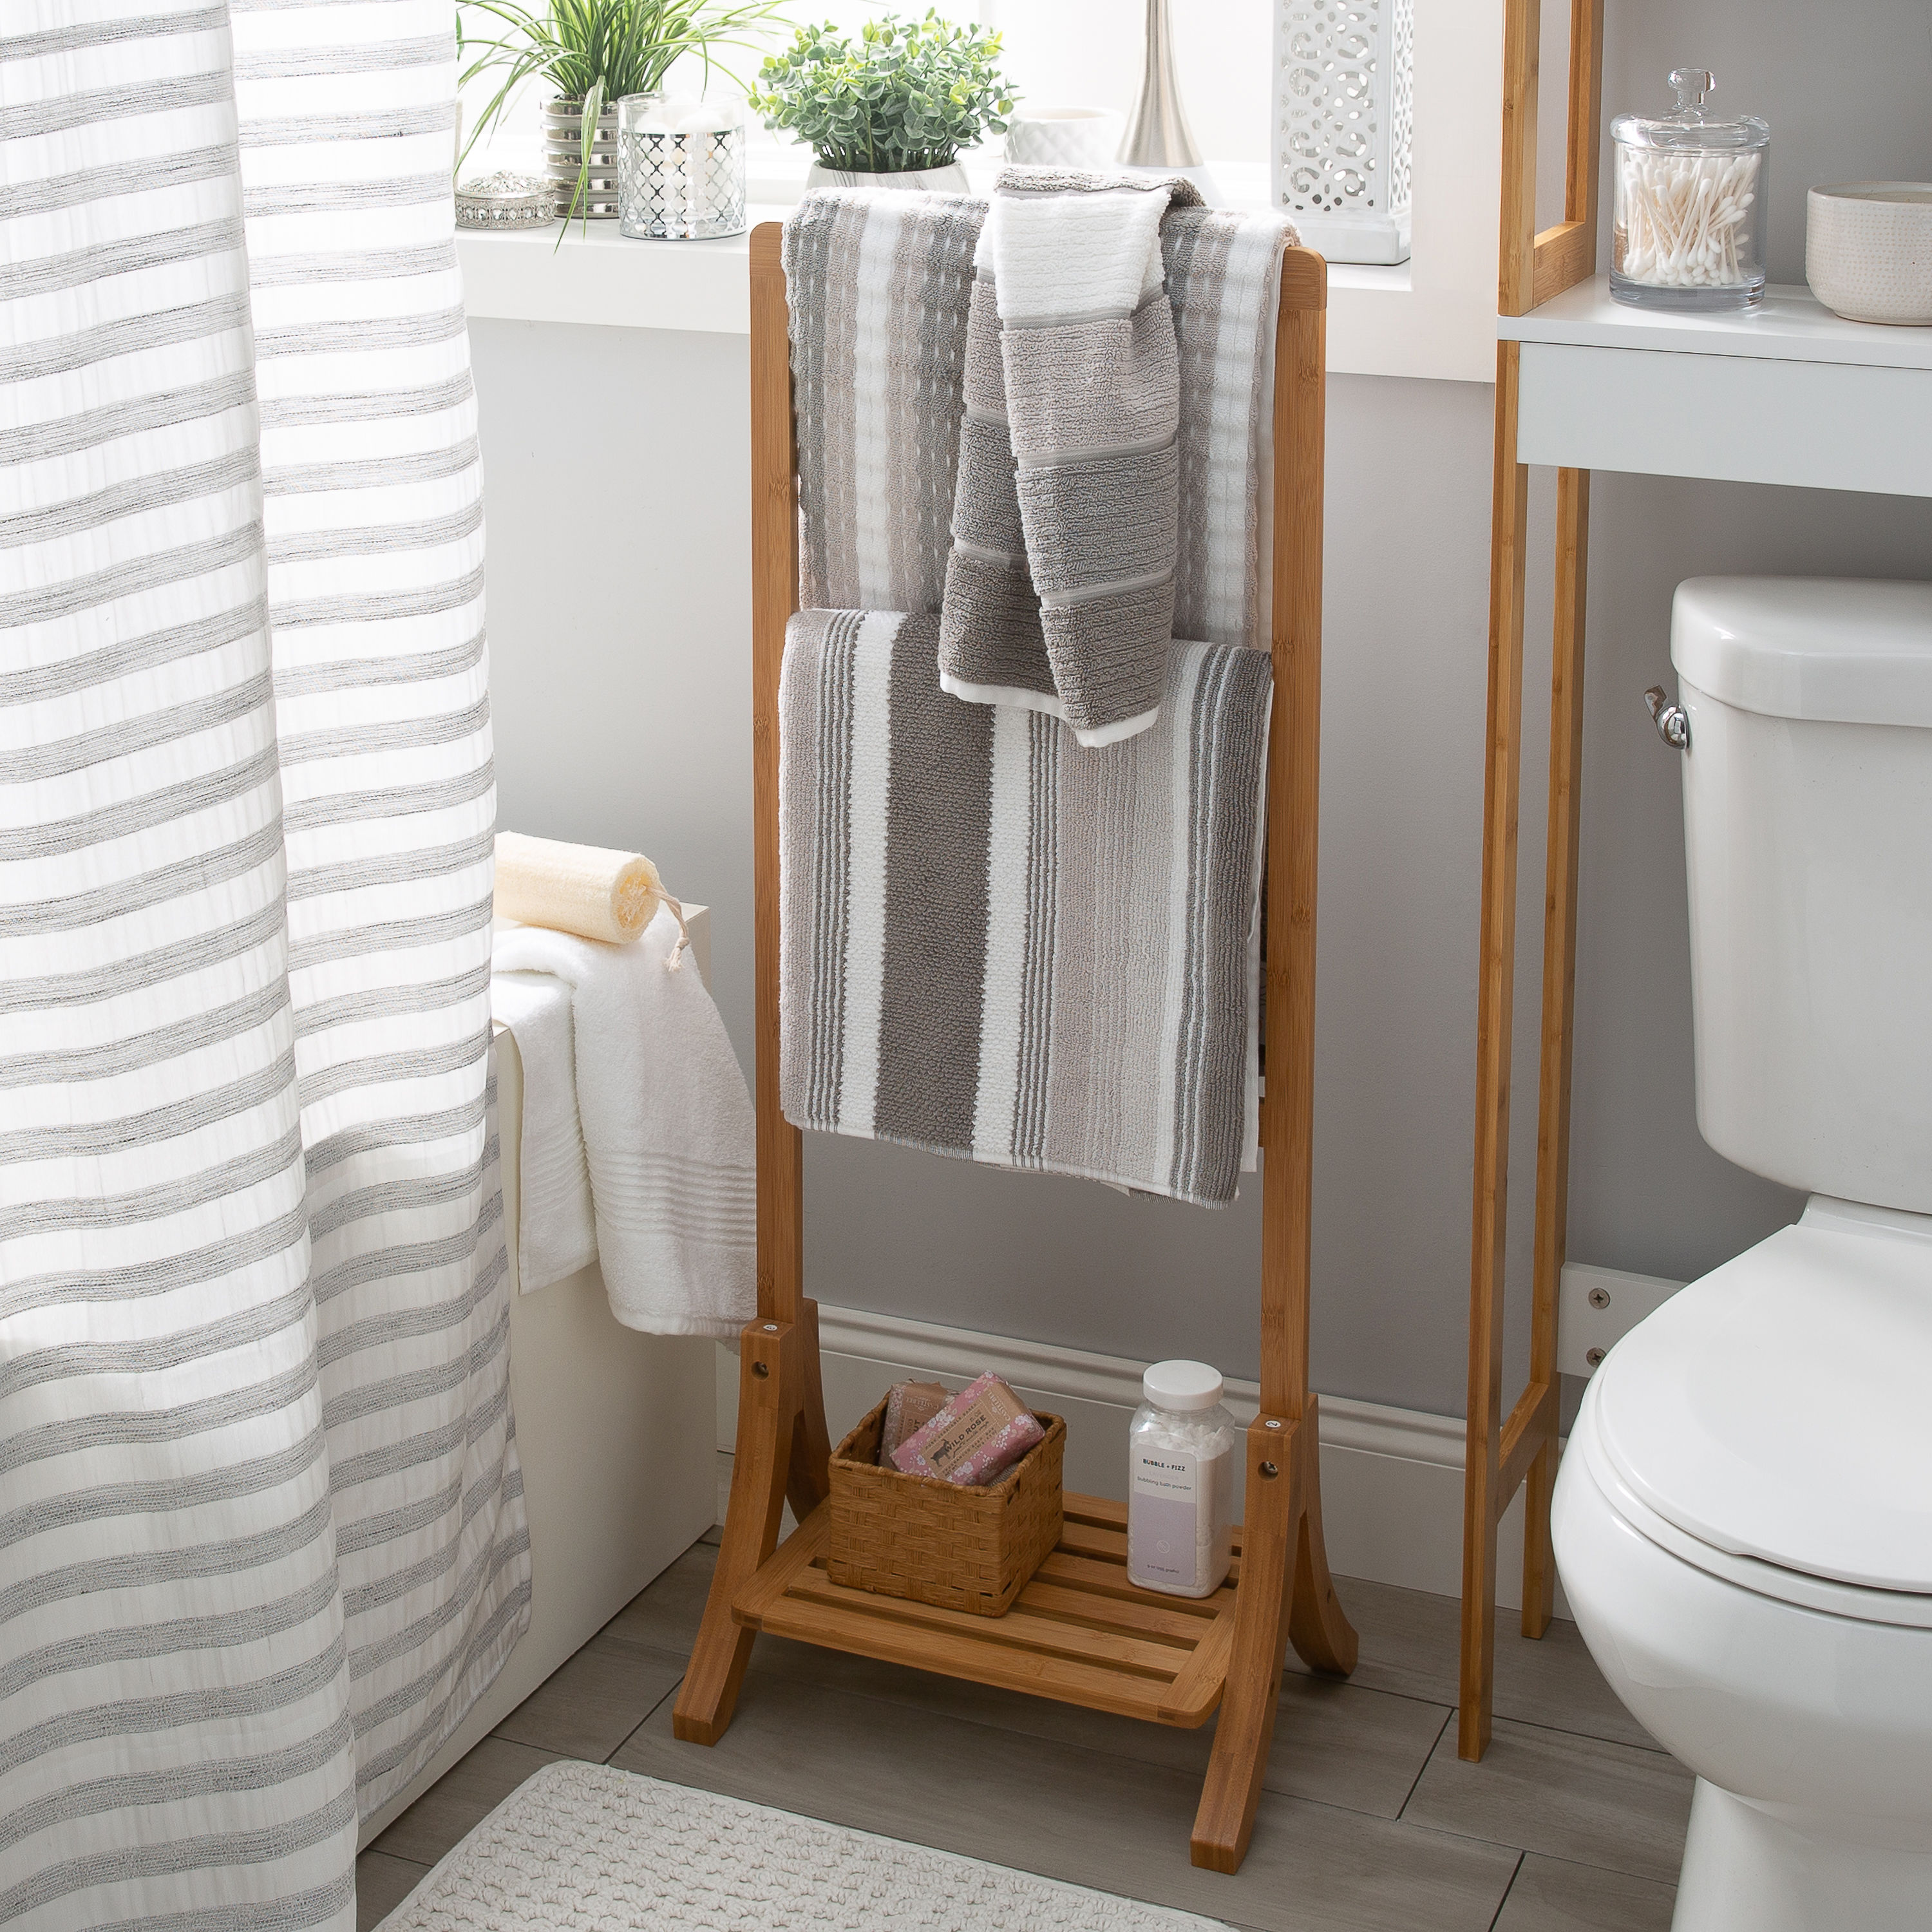 How to Choose the Perfect Towel Rack for Your Bathroom? – Rbrohant